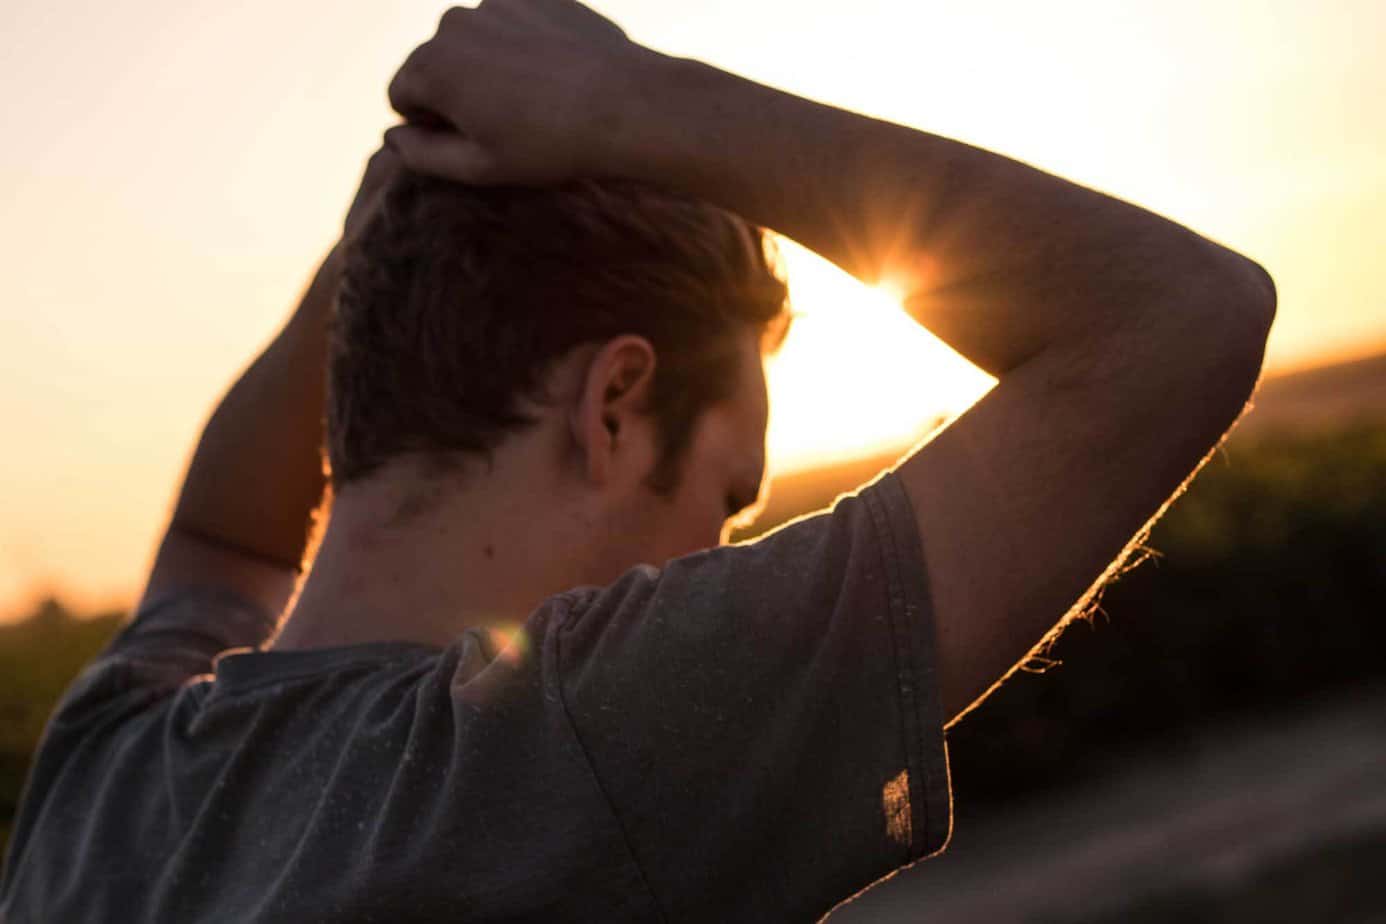 man holding his hair in hands outside with sunset